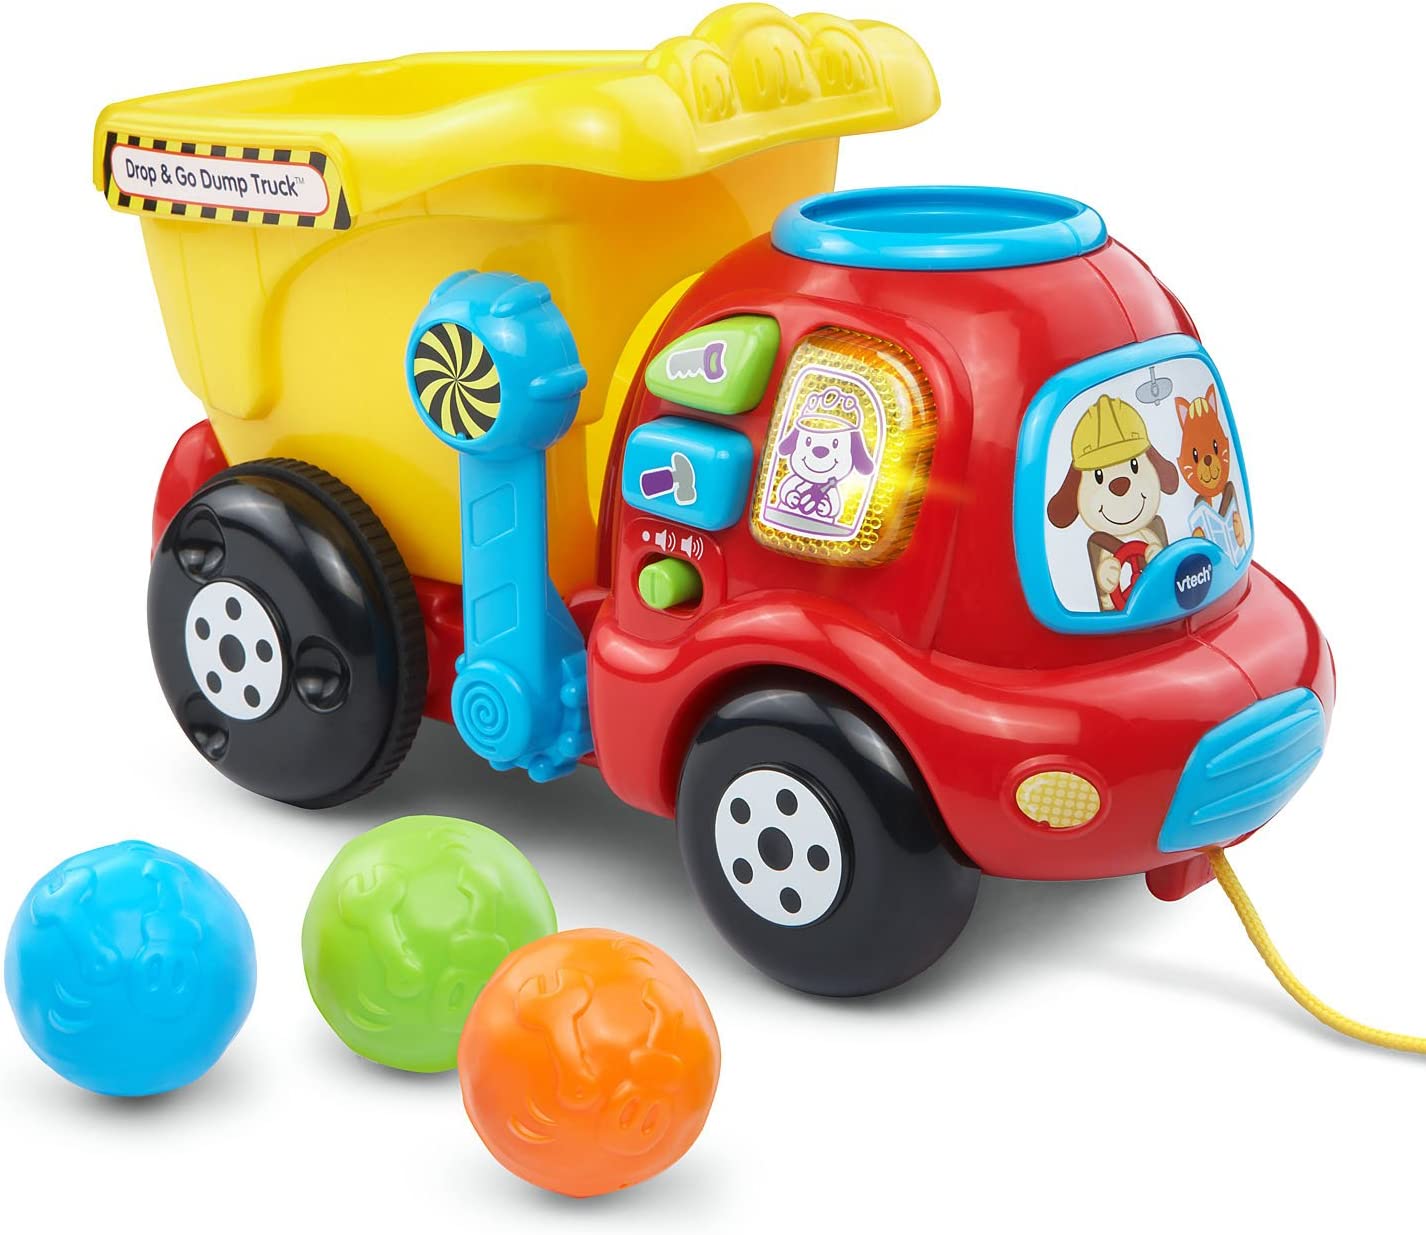 VTech Drop and Go Dump Truck (Yellow) $8 + Free Shipping w/Amazon Prime or Orders $25+